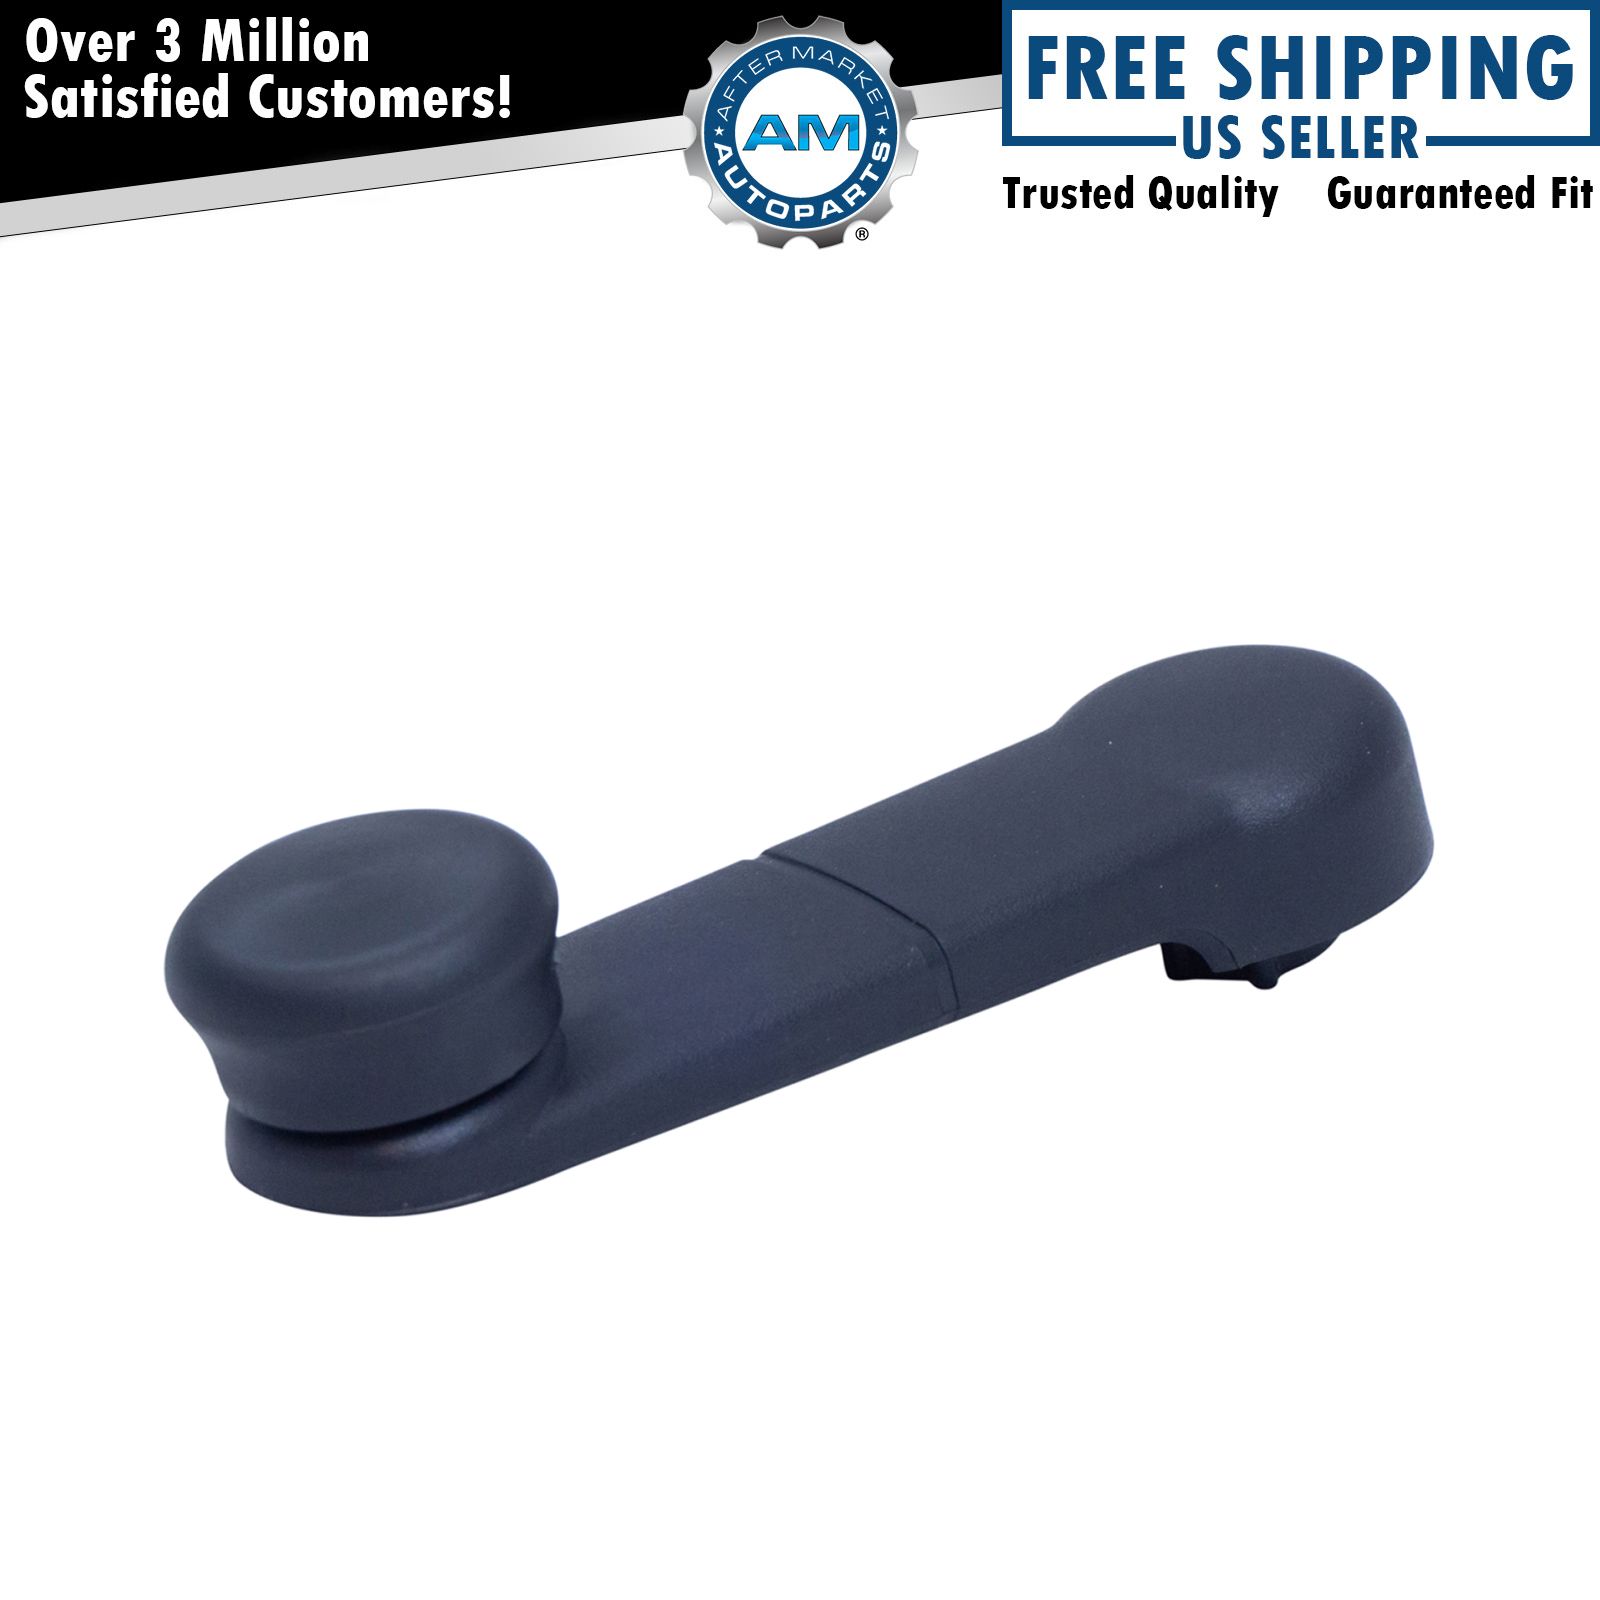 Manual Window Crank Handle Front or Rear LH or RH Side for Dodge Jeep Chrysler